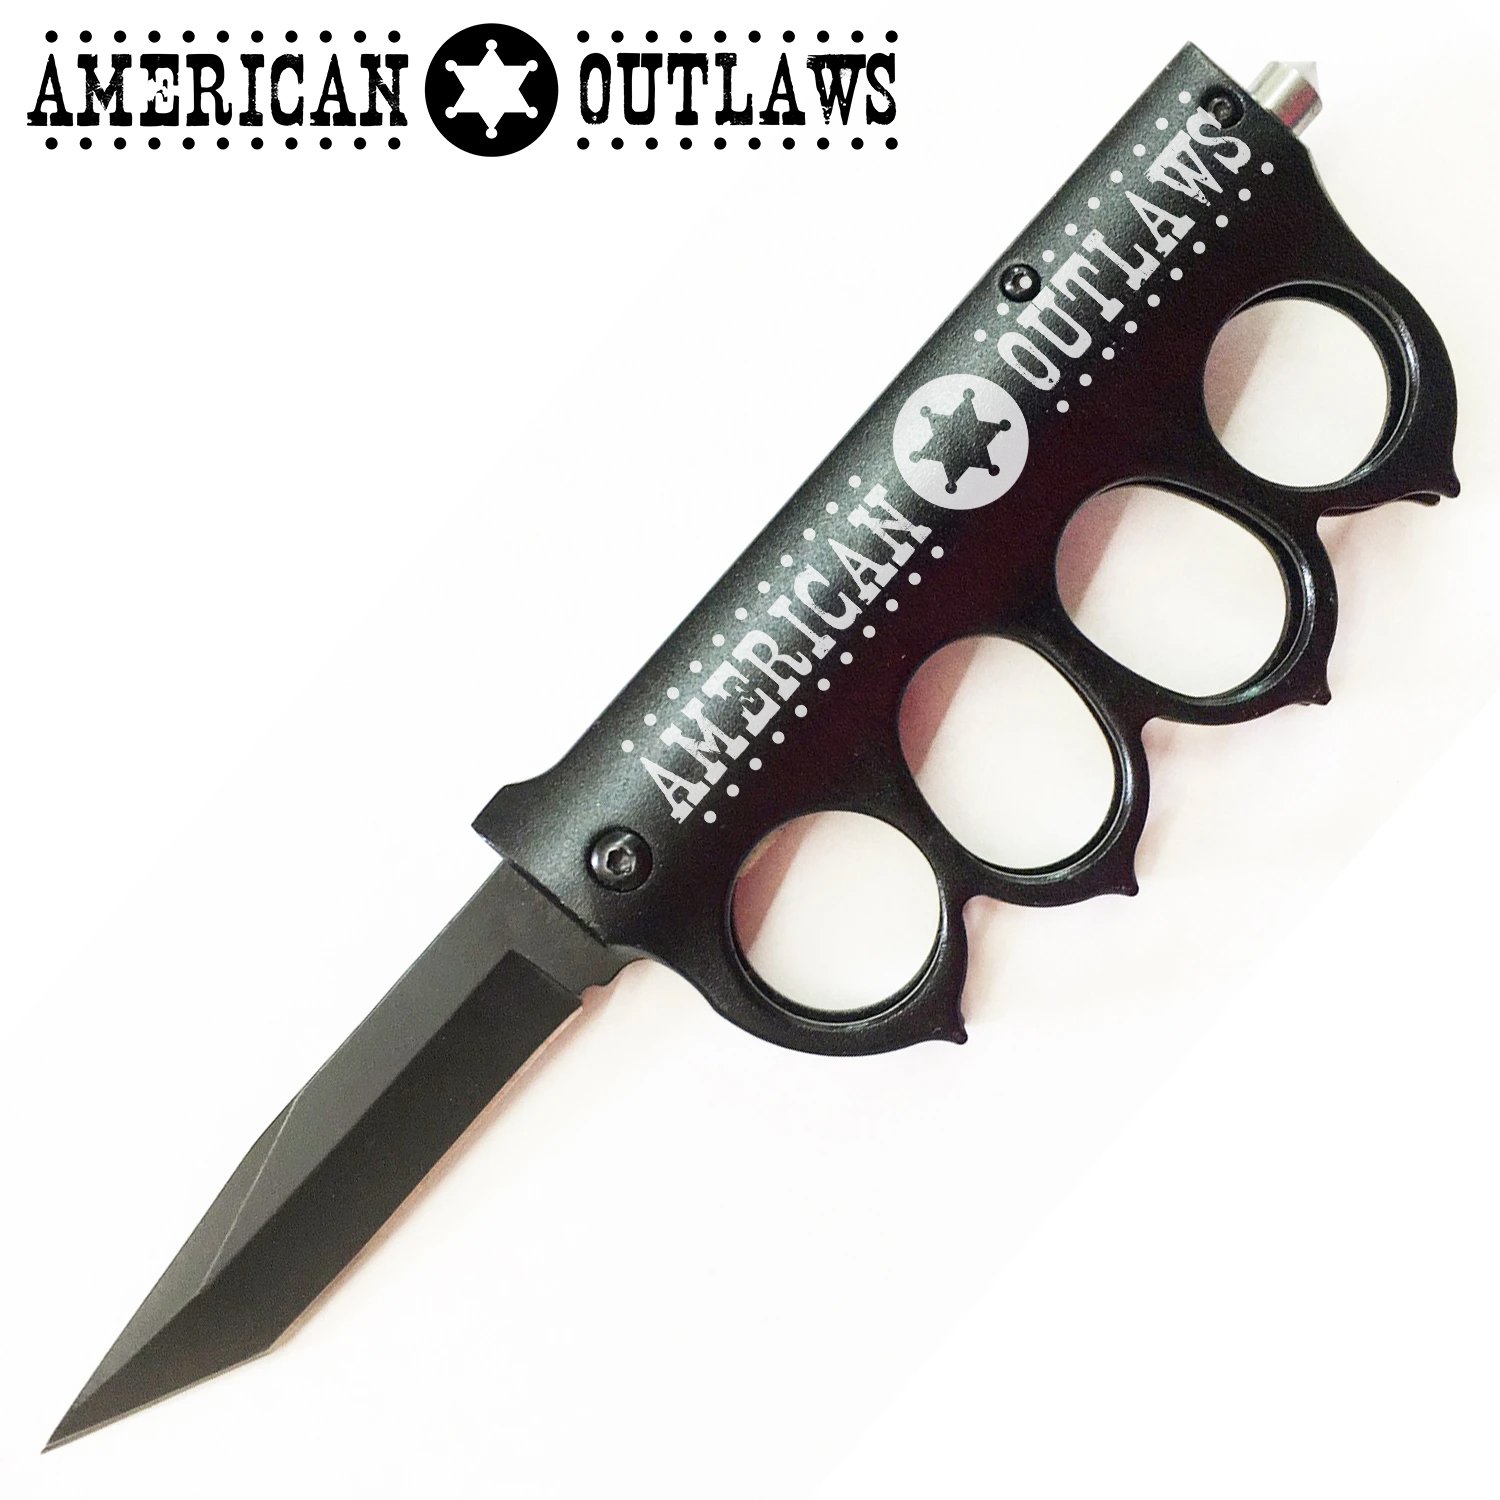 American Outlaws Trigger Action Folder